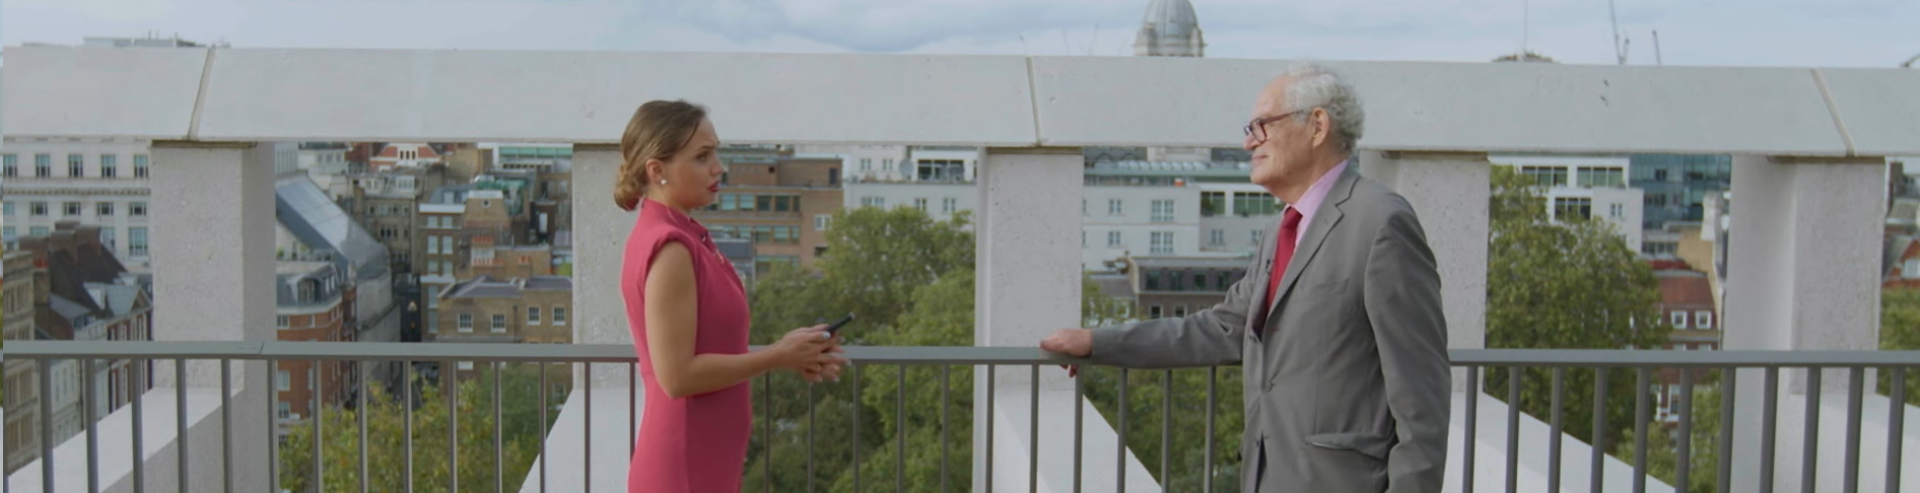 Charles Goodhart and Yulia Kulmatitskaya during interview for Private Talks, on Marshall Building's 8th floor terrace